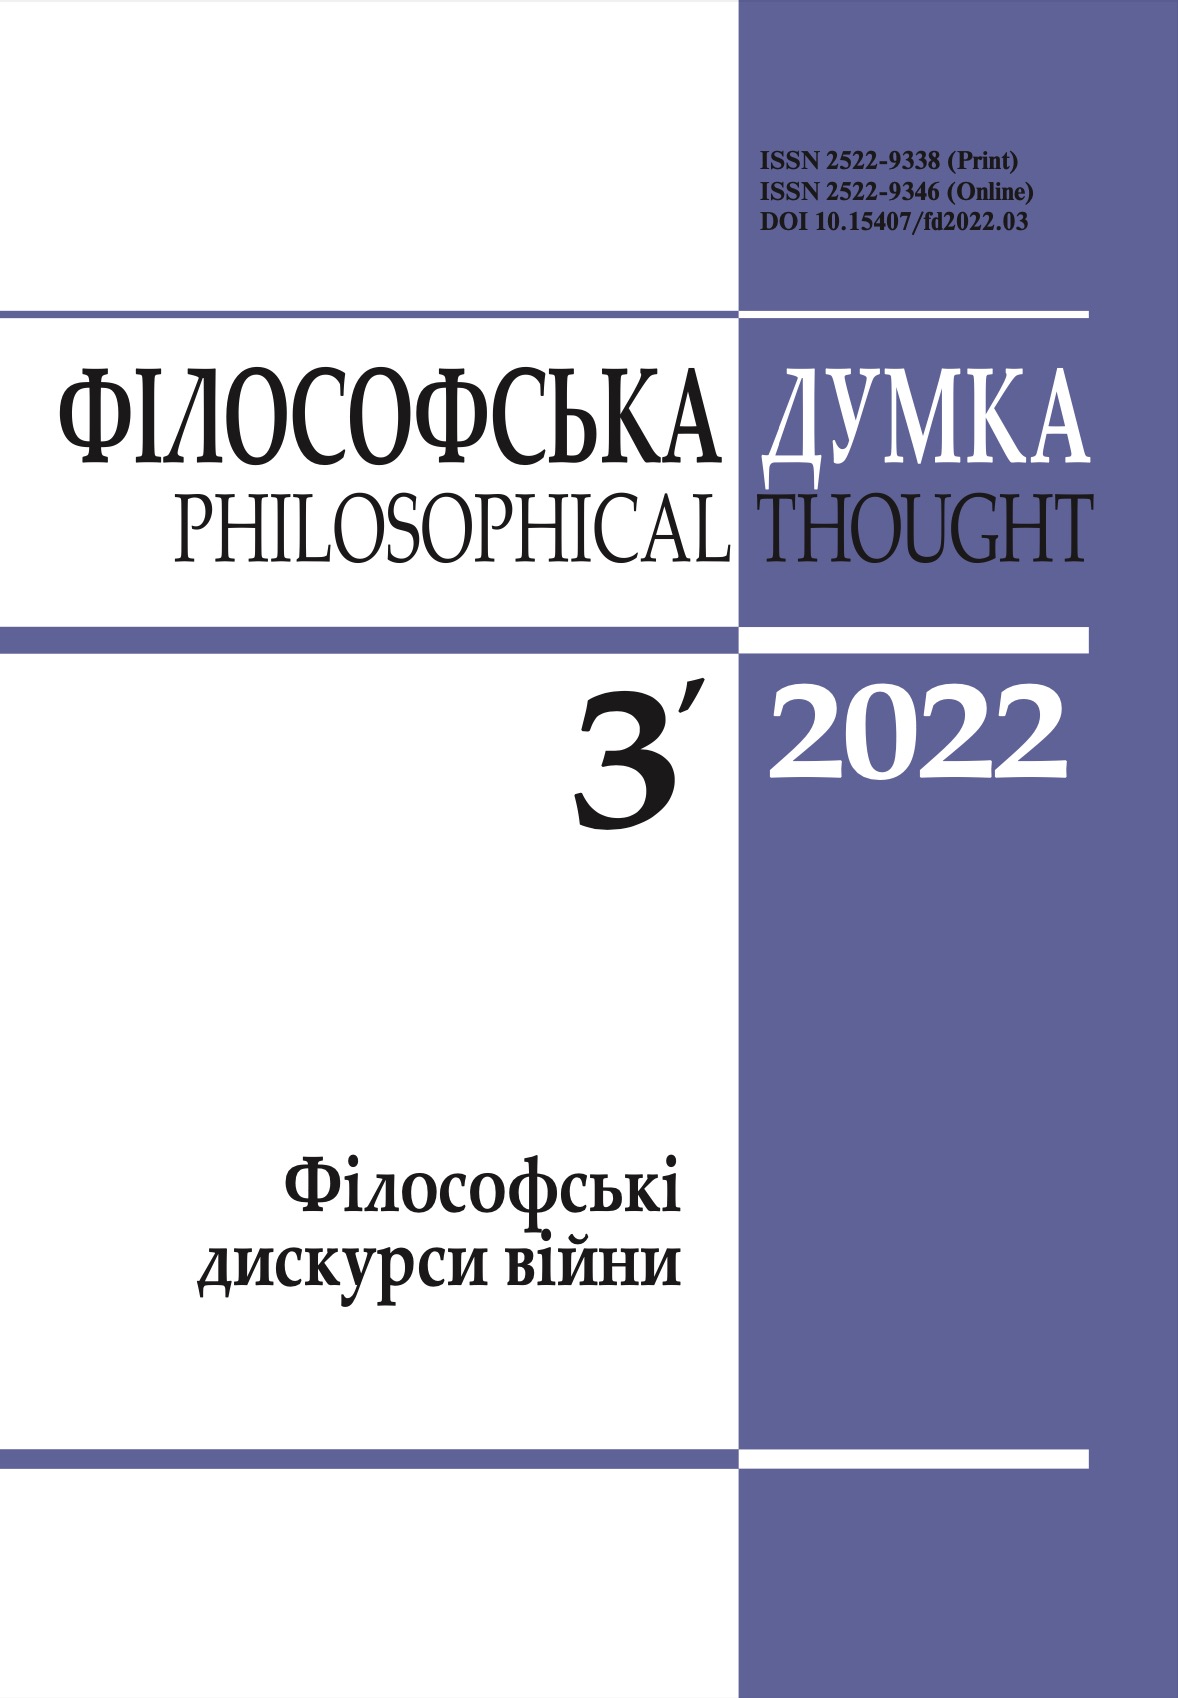 					View No. 3 (2022): Philosophical thought
				